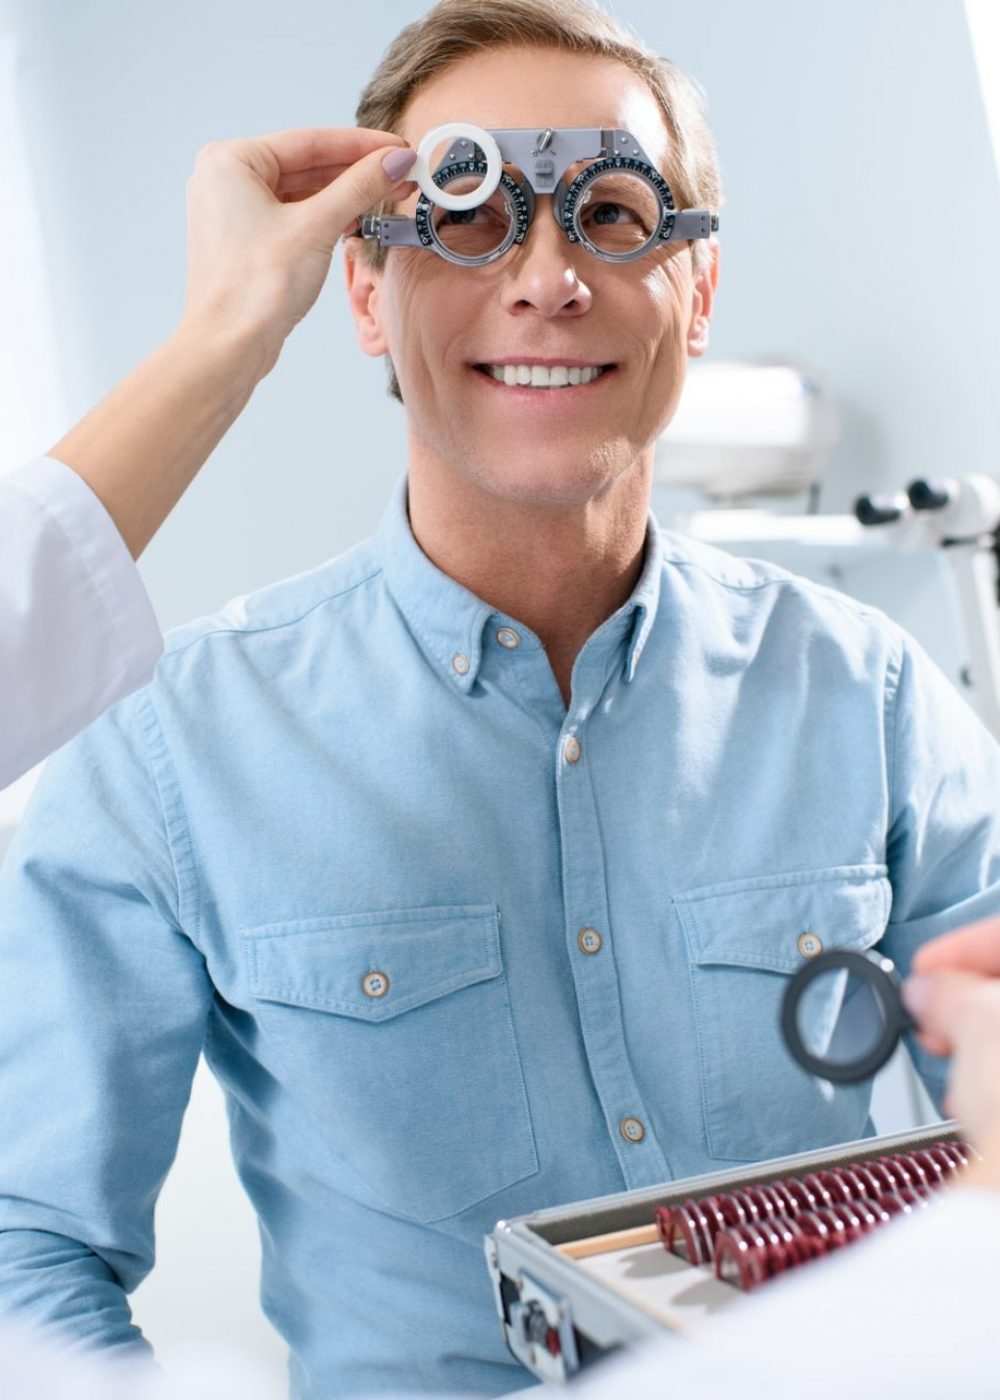 ophthalmologist examining middle aged man eyes with trial frame and lenses